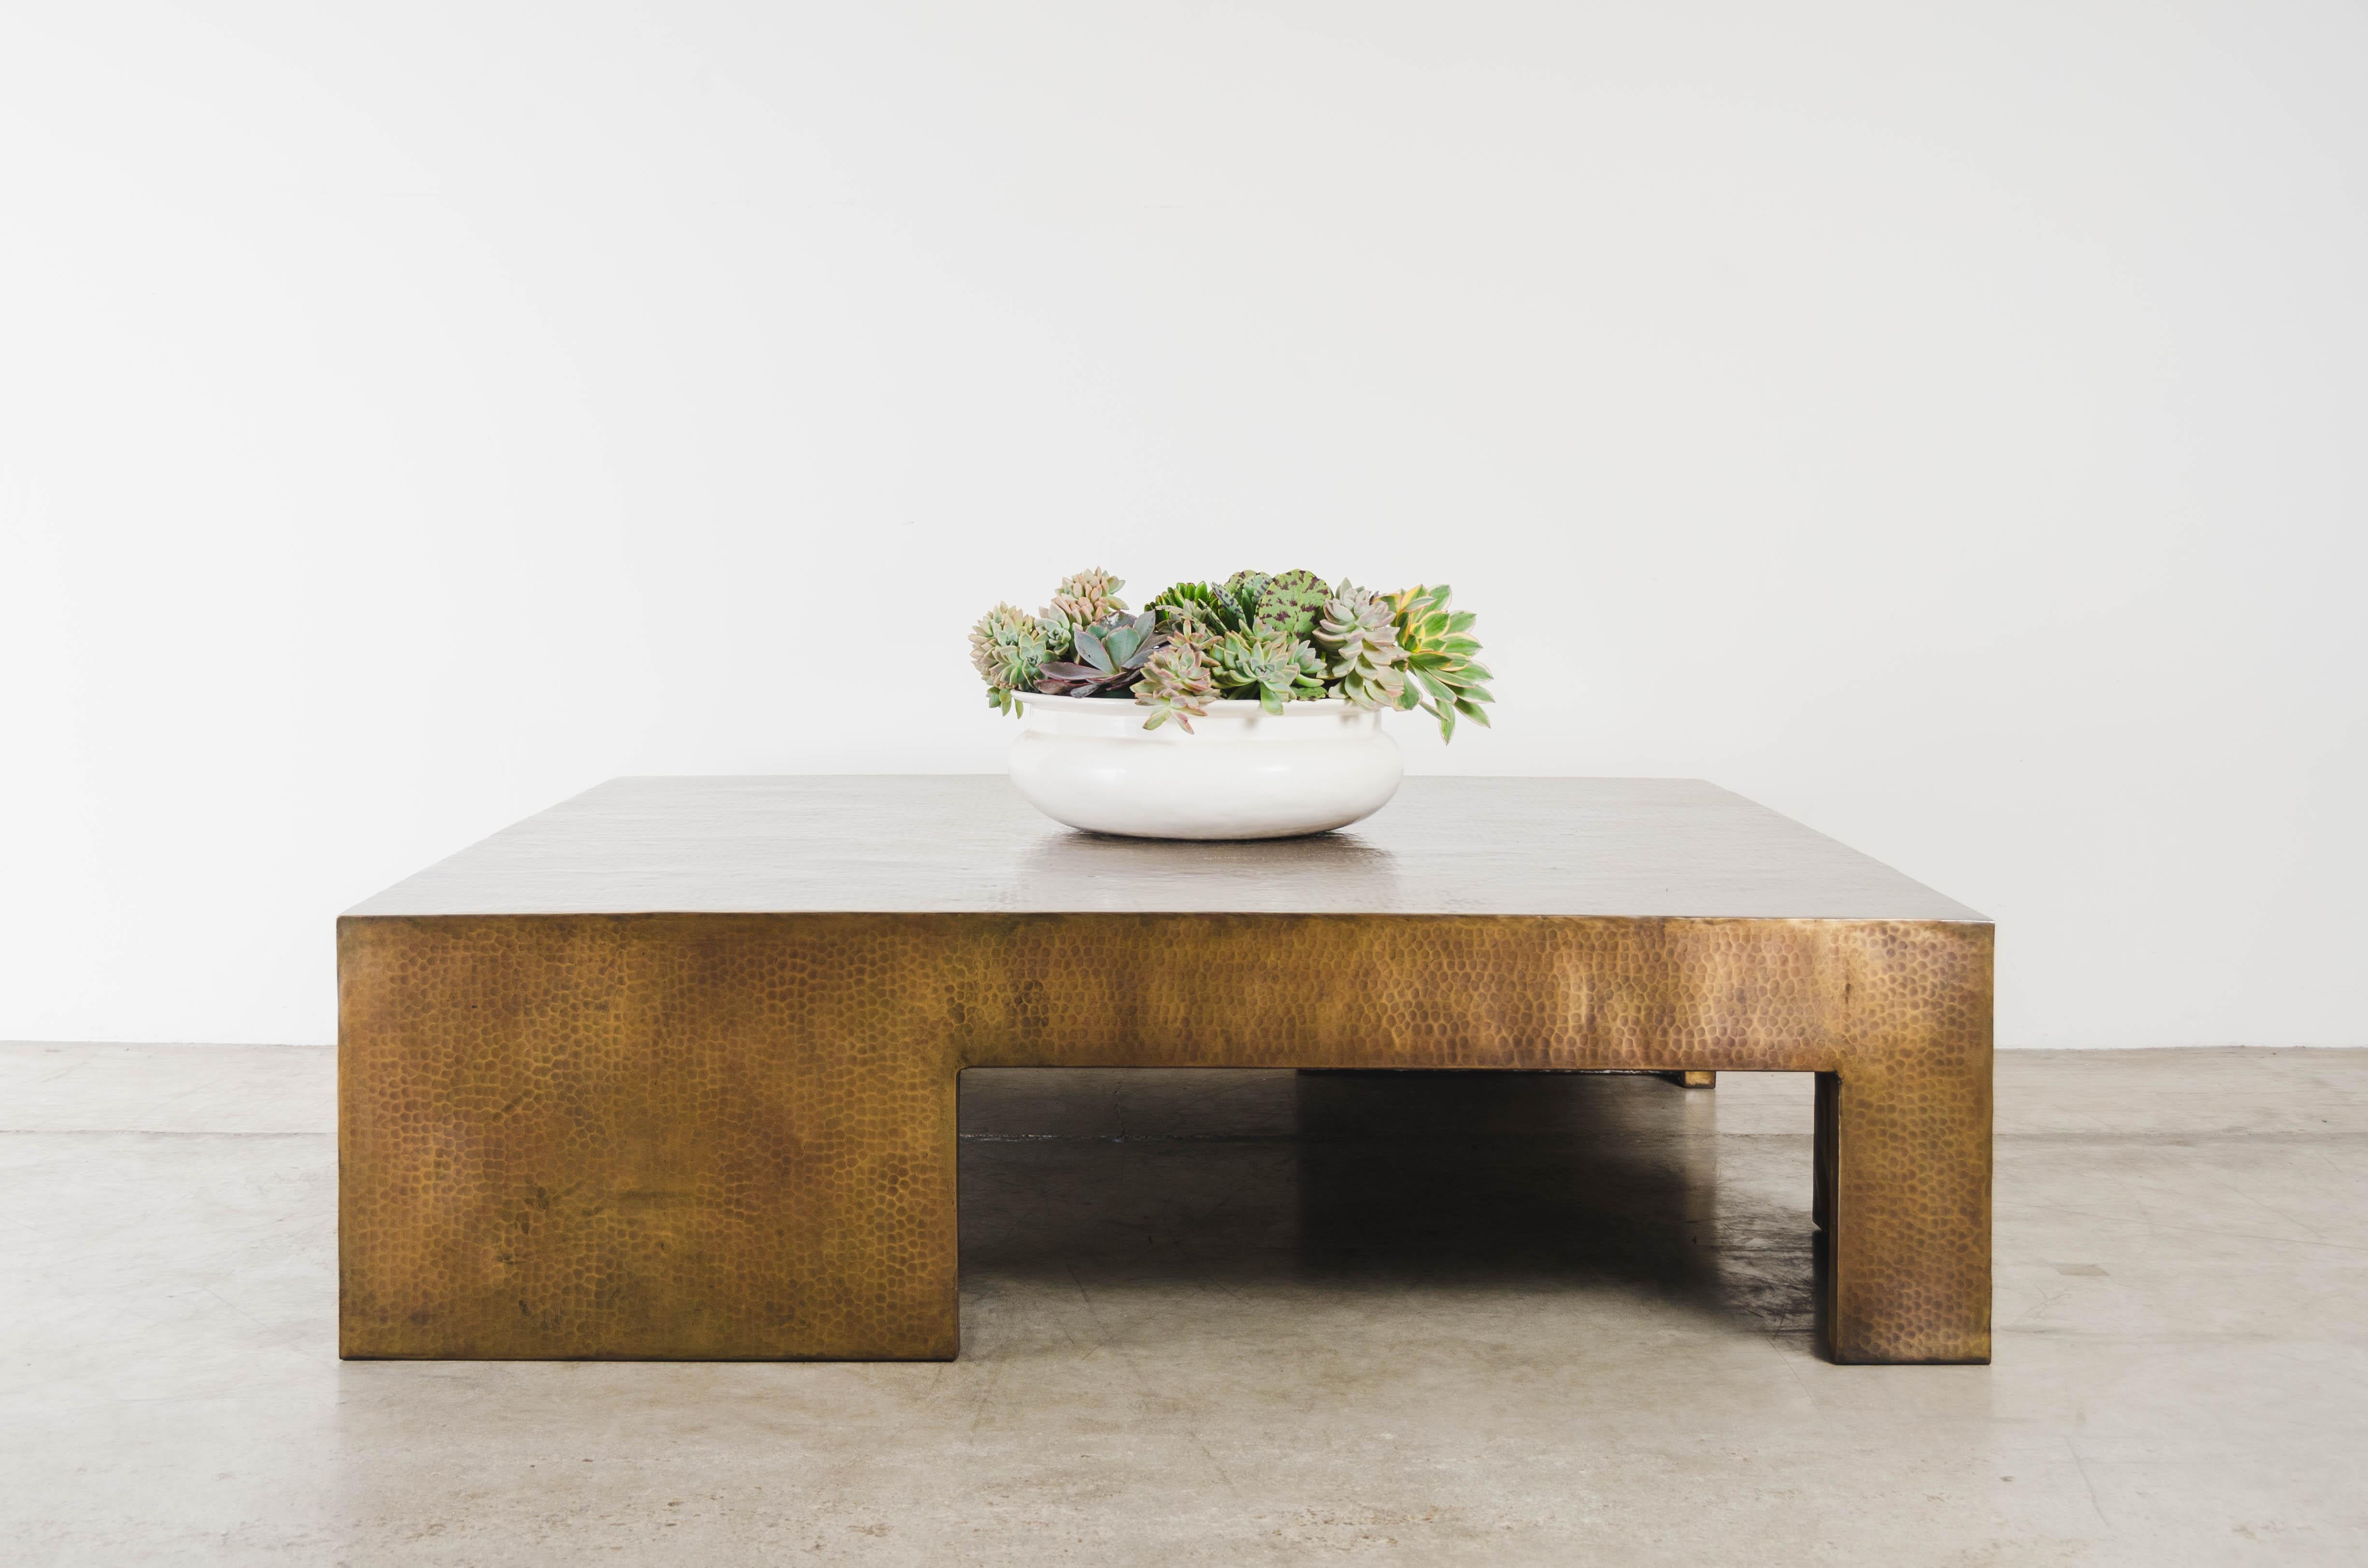 Minimalist Contemporary Repousse Brass Low Square Table with Alternate Legs by Robert Kuo